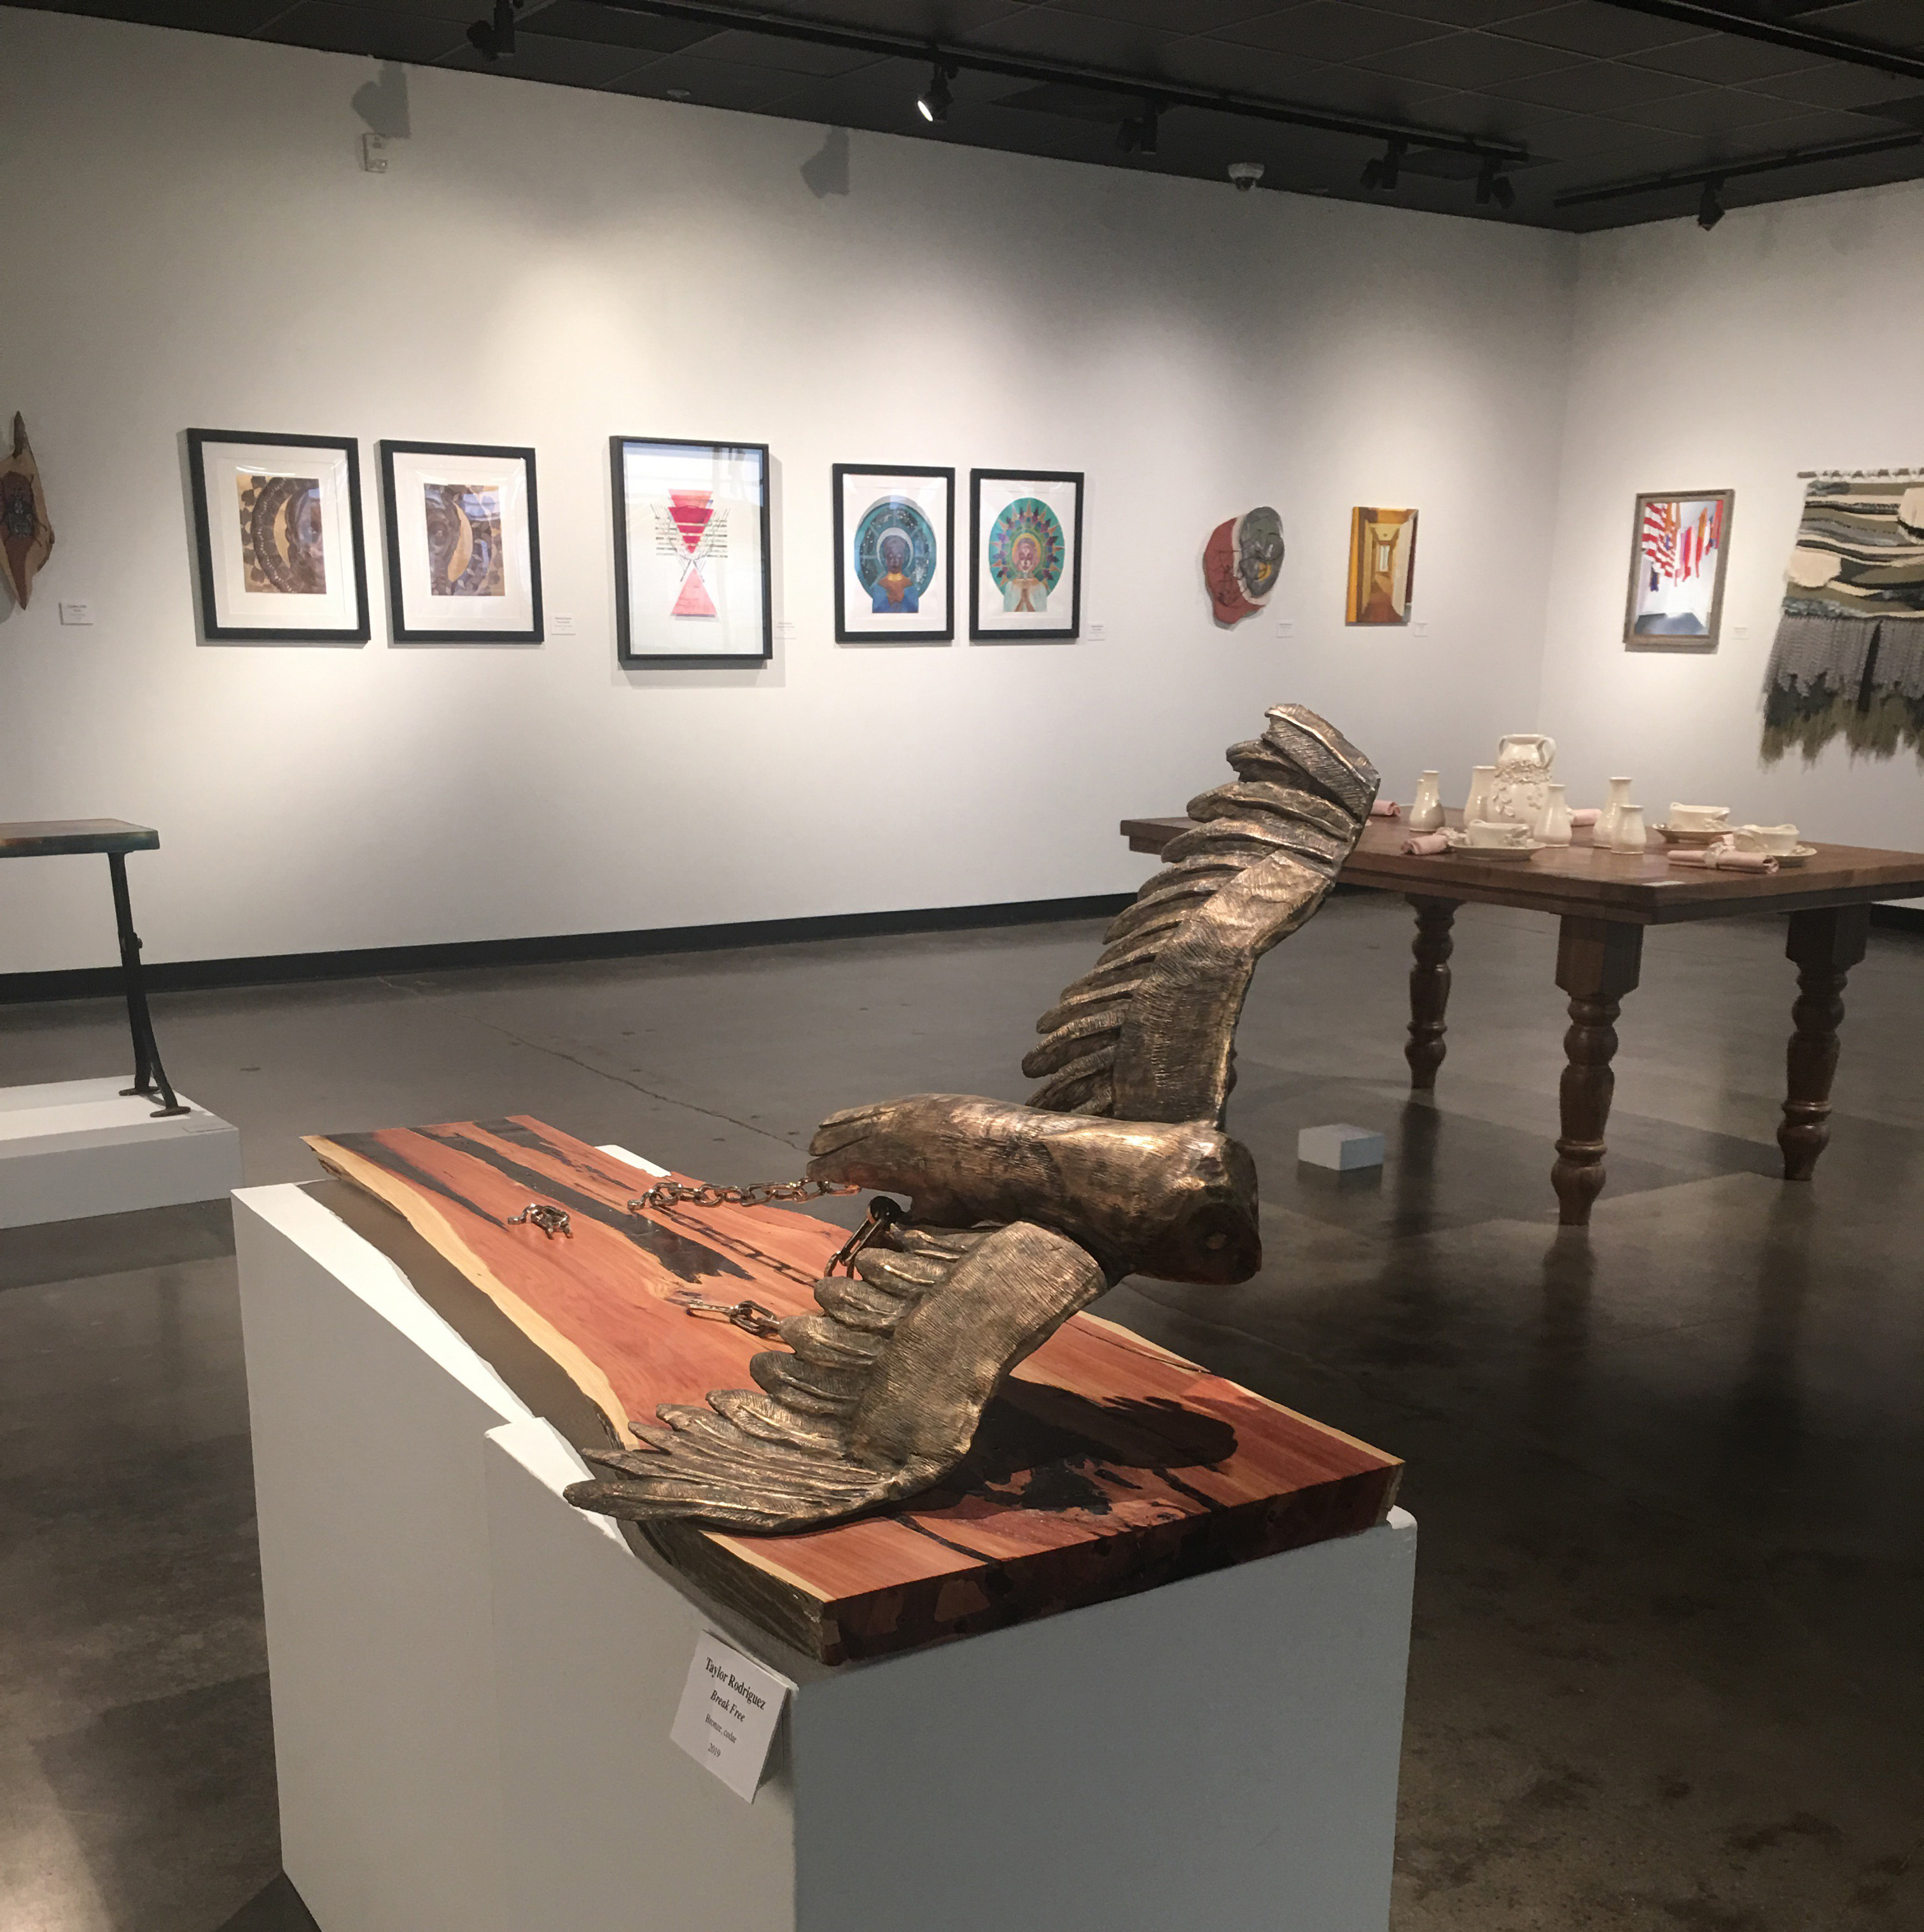 PHOTO: This years BFA show was the first to utilize the additional space of the new wing. With artwork held in both wings large works like Taylor Rodriguez's "Break Free" and McKenna Bailey's "Handmade" could center the rooms. Image is of main wing with Rodriguez's "Break Free" cedar and bronze owl sculpture in the center. Behind is Bailey's "Handmade," a hand made table and table setting with ceramics. Photo by The Signal Online Editor Alyssa Shotwell.